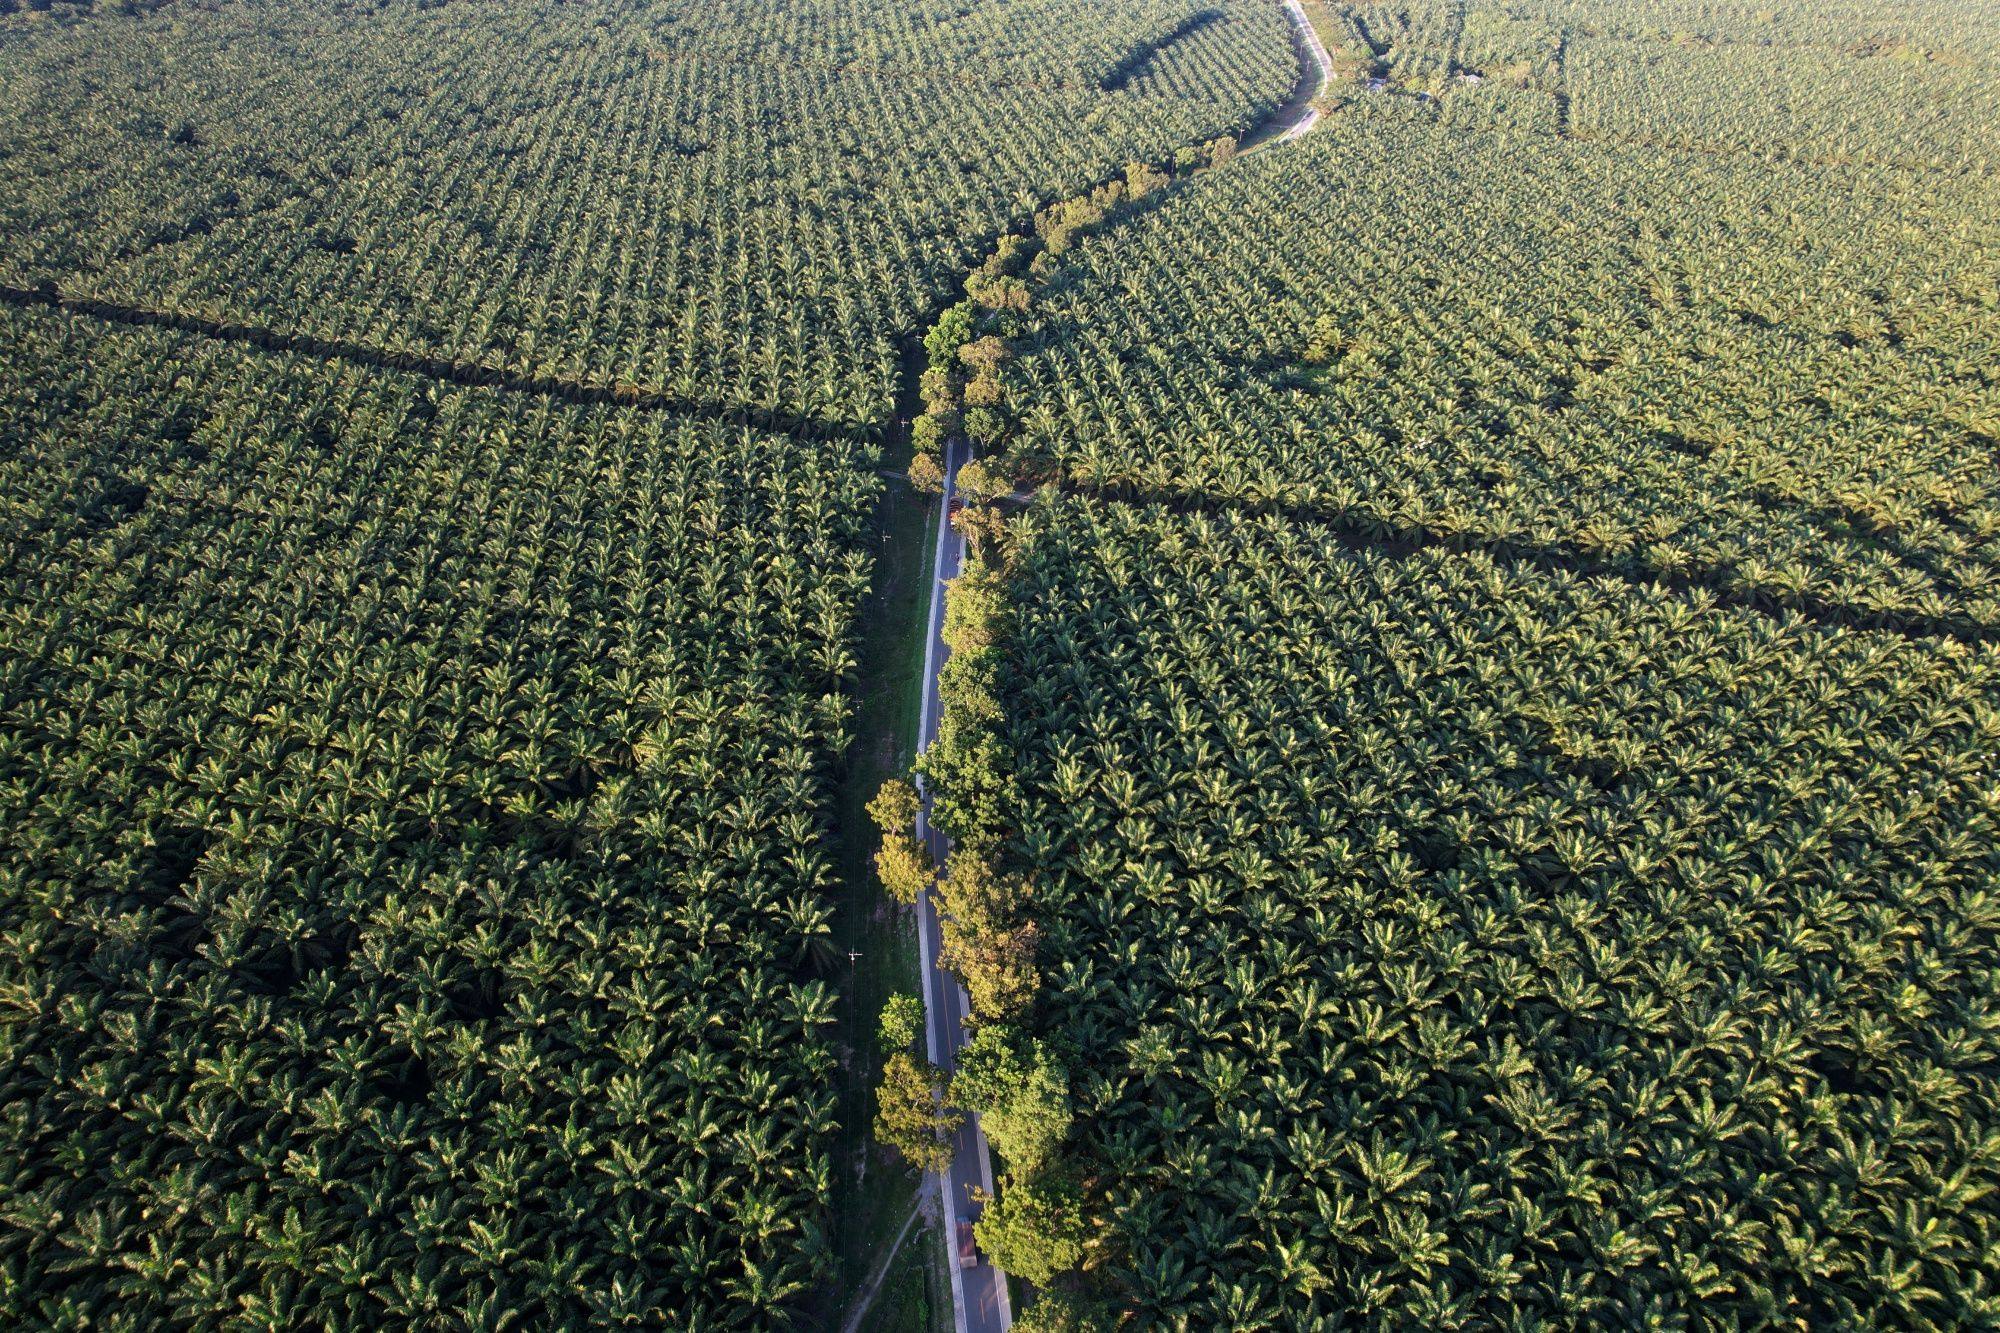 A palm oil plantation in Luwu Timur Regency, South Sulawesi, Indonesia. Photo: Bloomberg